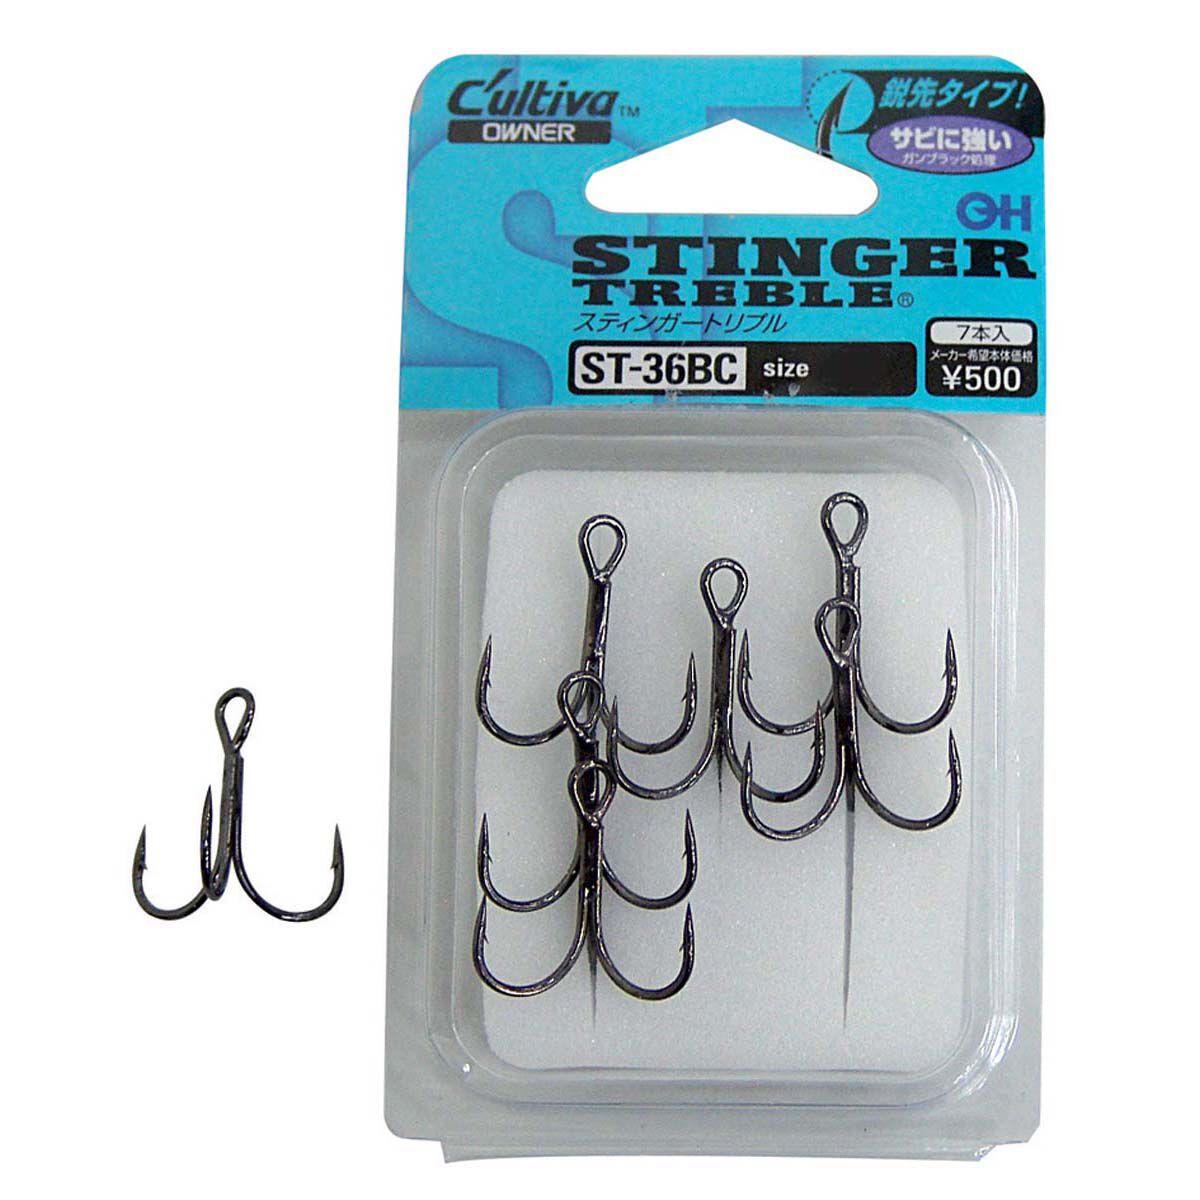 Treble Hook Covers For Lures Safety Holder Covers Fishing Treble